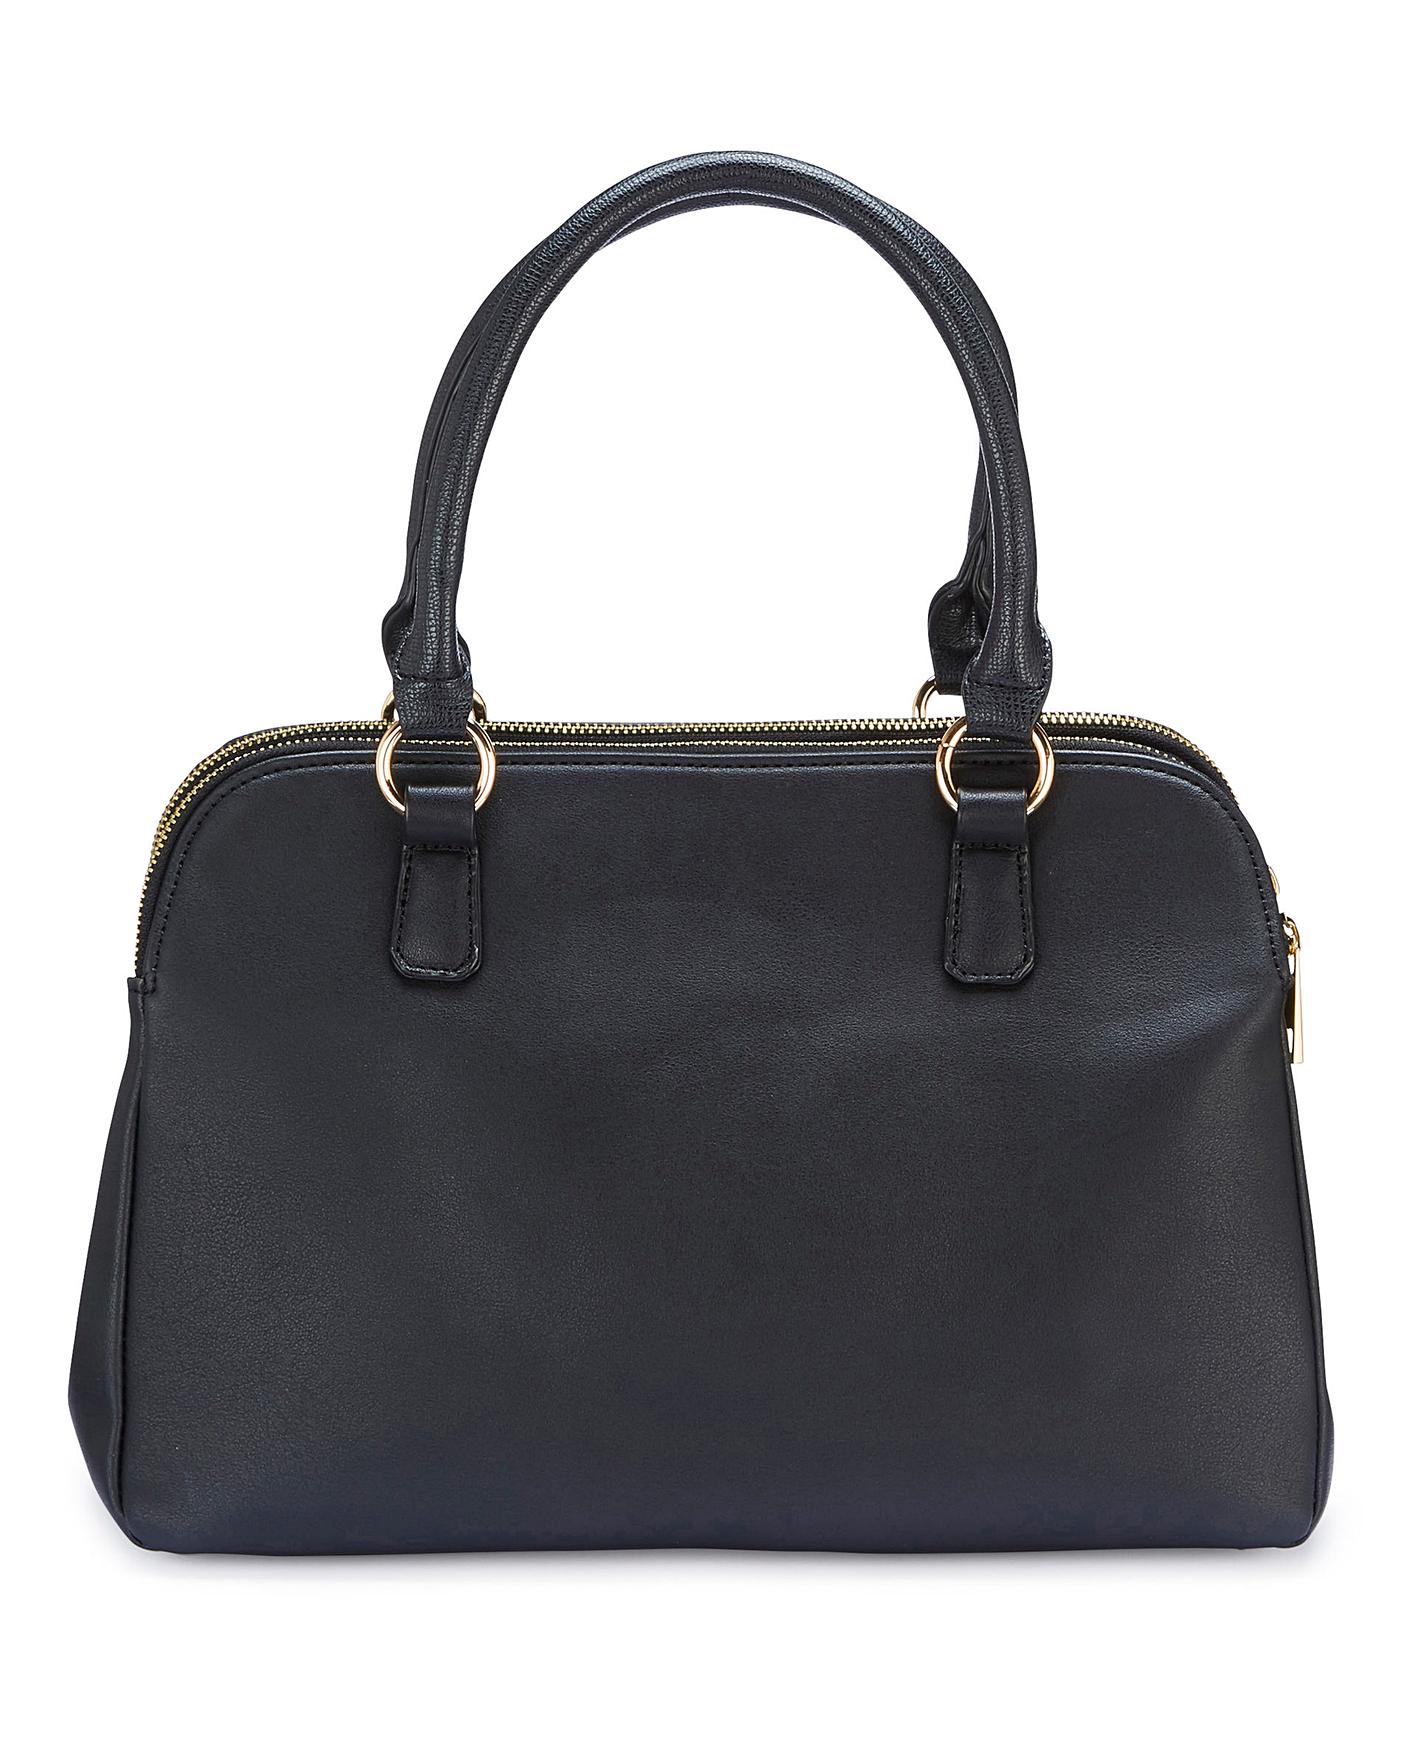 large black handbag with compartments